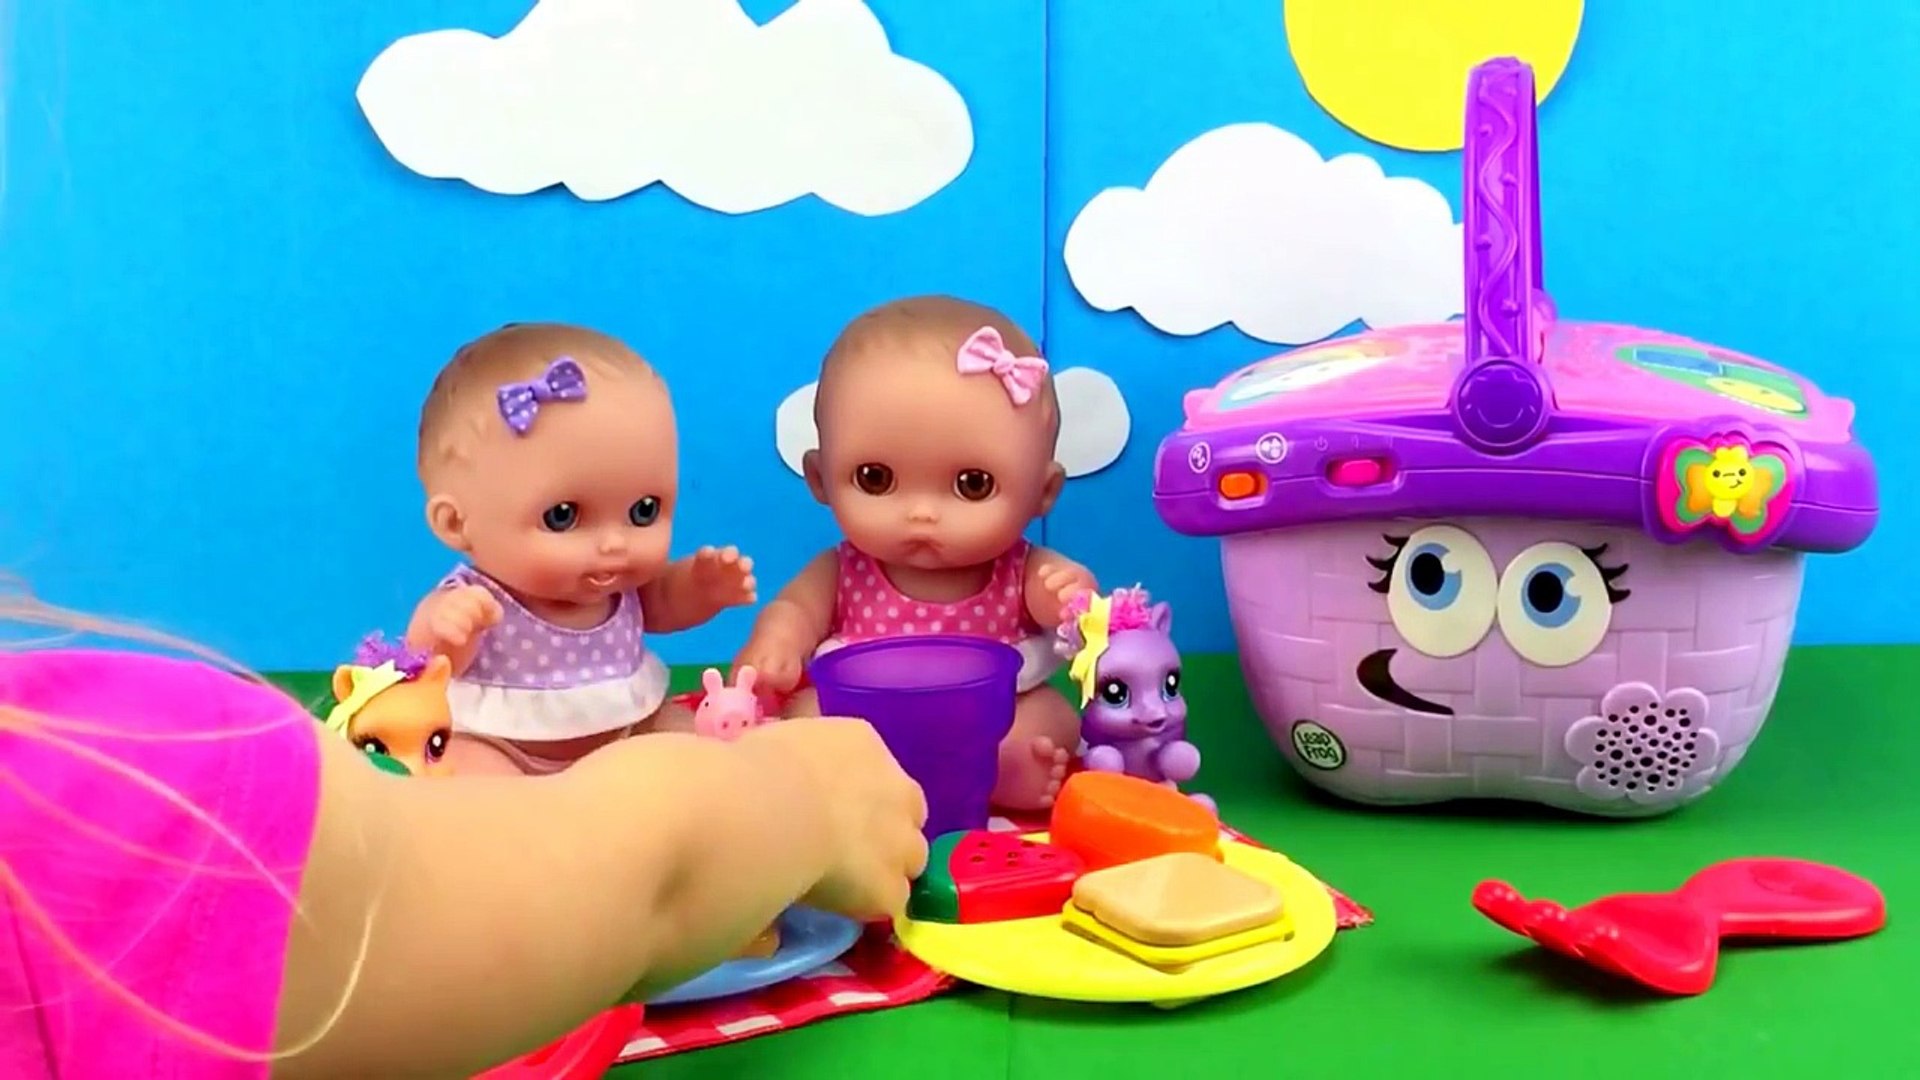 ⁣Twin Babies Baby Dolls Lil Cutesies Doll Picnic Basket in The Park Peppa Pig MLP Fashems Toy Videos